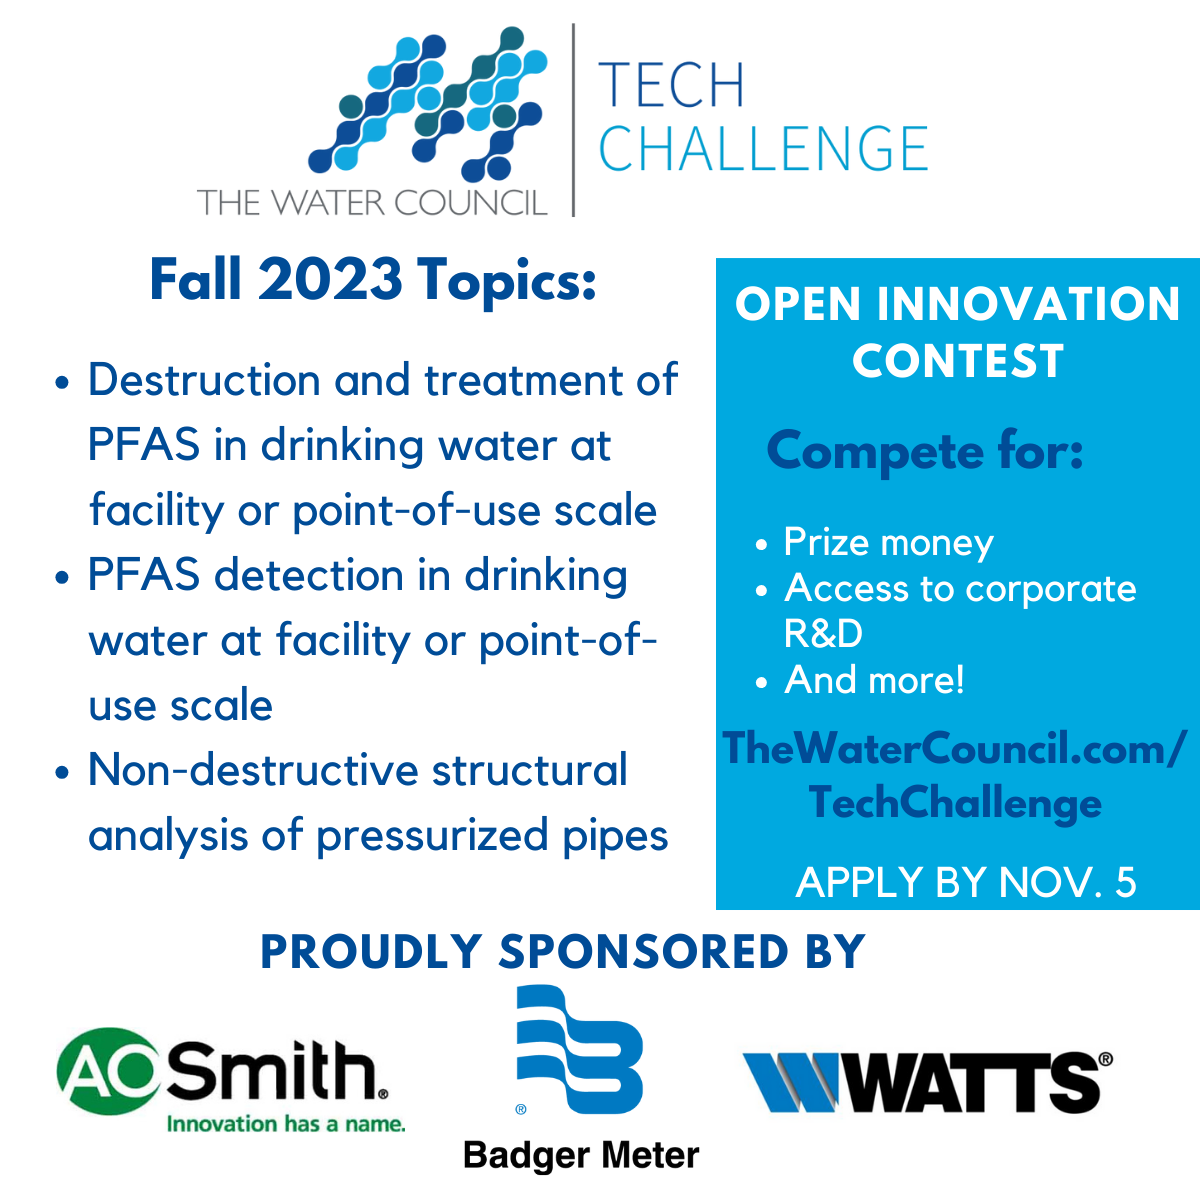 One week remaining to submit your solutions for our Tech Challenge topics! Learn more or apply by November 5th! https://thewatercouncil.com/open...